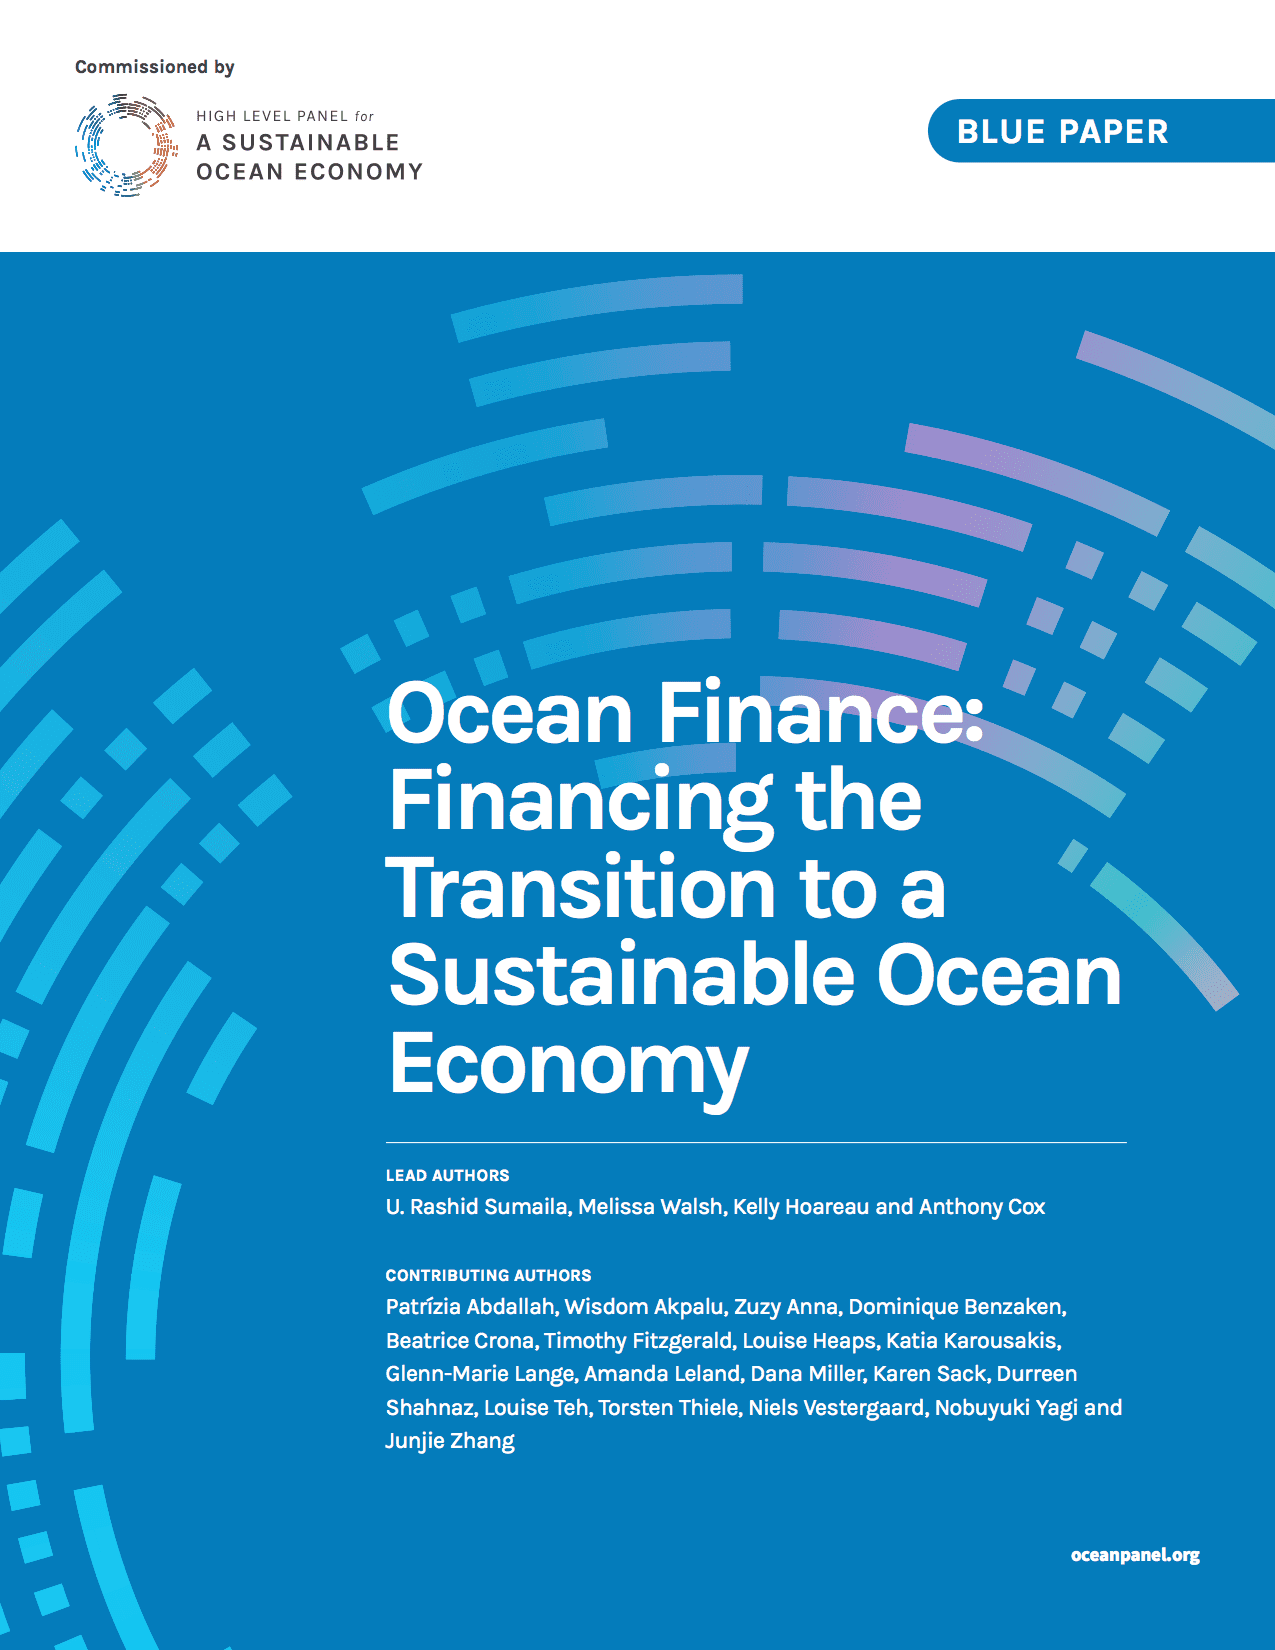 Cover of the report for the blue paper: Ocean Finance